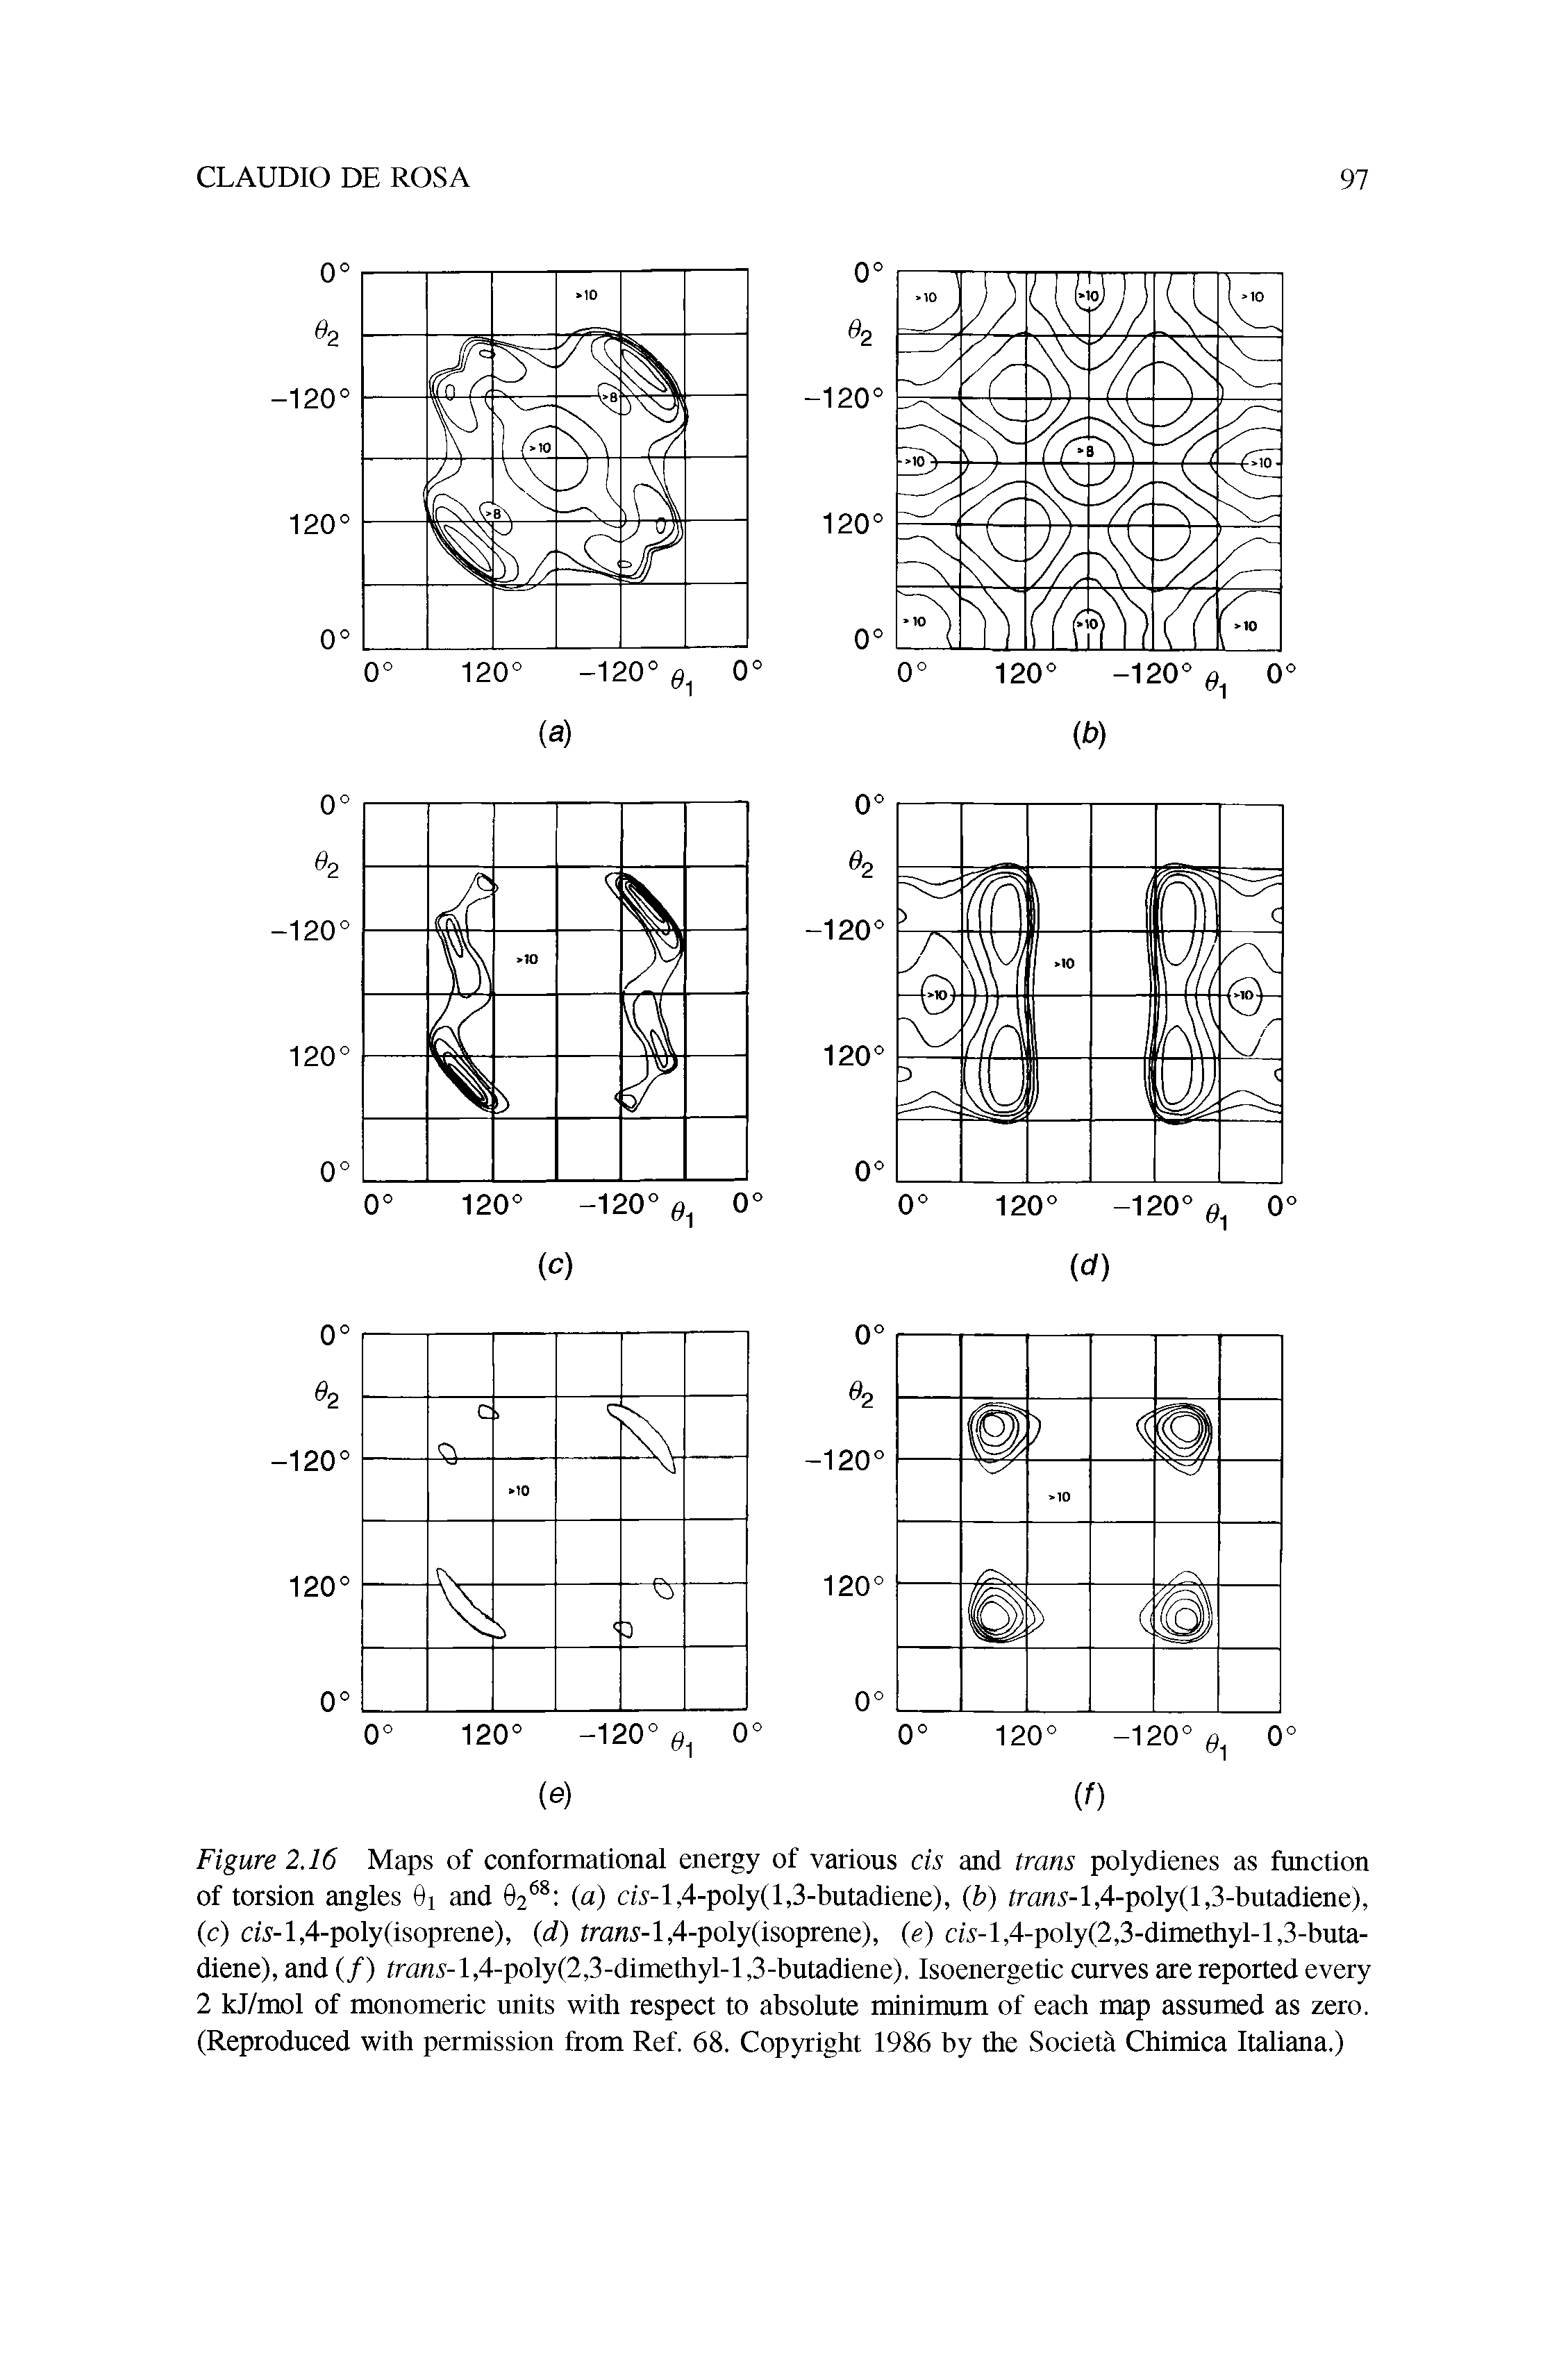 Figure 2.16 Maps of conformational energy of various cis and trans polydienes as function of torsion angles 9i and 0268 (a) cis-l,4-poly( 1,3-butadiene), (b) /ra .v-l,4-poly( J, 3-buladiene), (c) cis-l, 4-poly(isoprene), (d) trans-1,4-poiy(isoprenej, (e) cis-1,4-poly(2,3-dimethyl-1,3-butadiene), and (/) trans- 1,4-poly(2,3 -dimethyl-1,3-butadiene). Isoenergetic curves are reported every 2 kJ/mol of monomeric units with respect to absolute minimum of each map assumed as zero. (Reproduced with permission from Ref. 68. Copyright 1986 by the Societa Chimica Italiana.)...